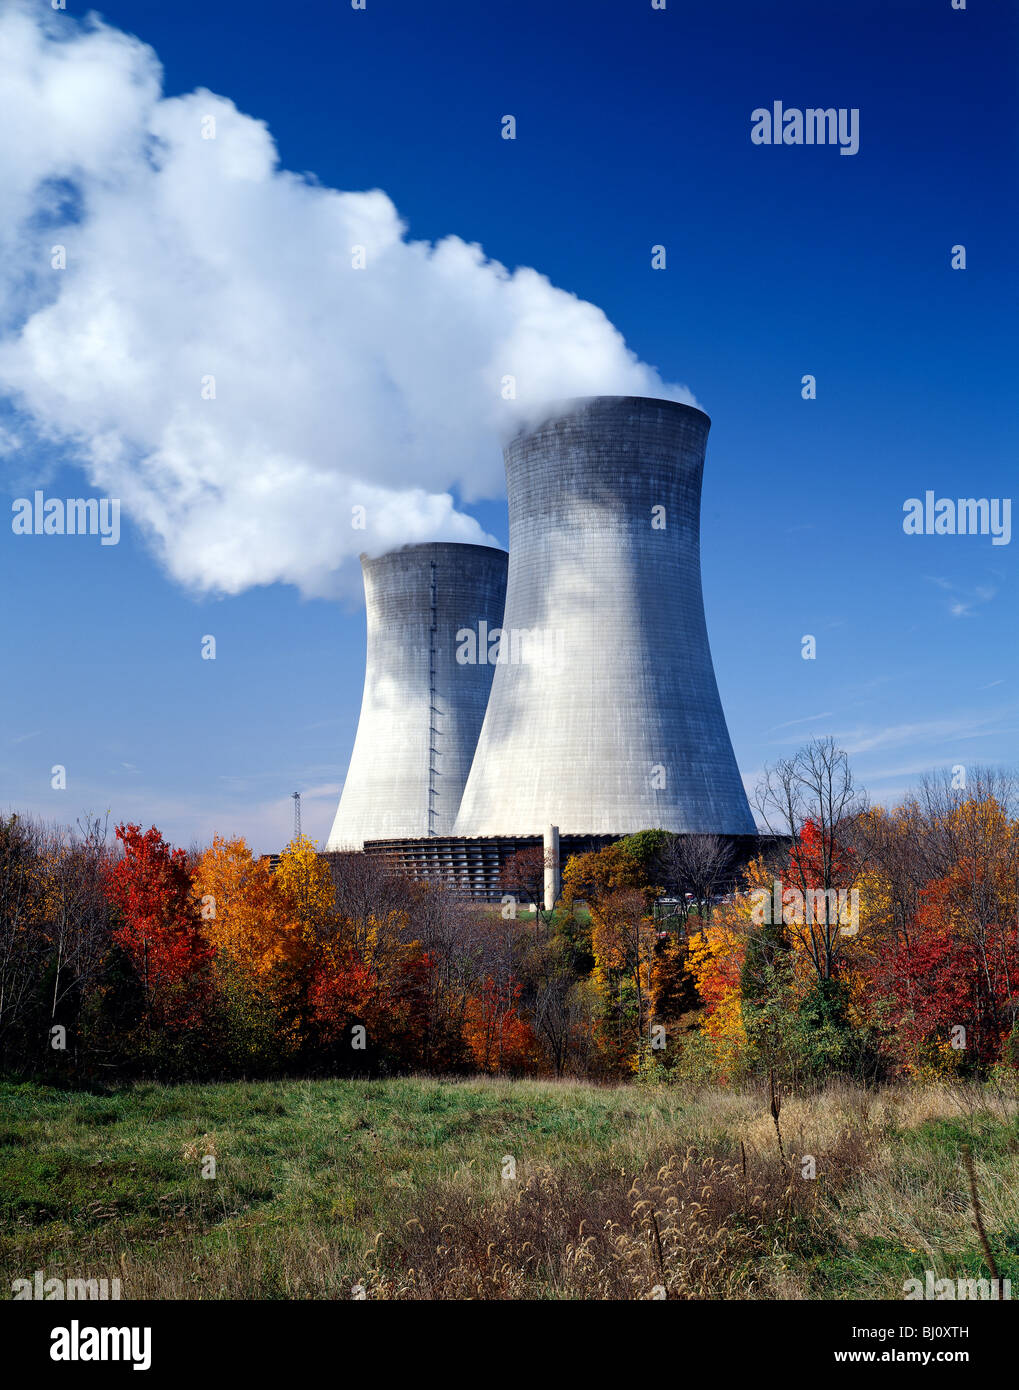 Steam rises from the cooling towers of the Limerick Nuclear Power Plant, Limerick, Pennsylvania, USA Stock Photo